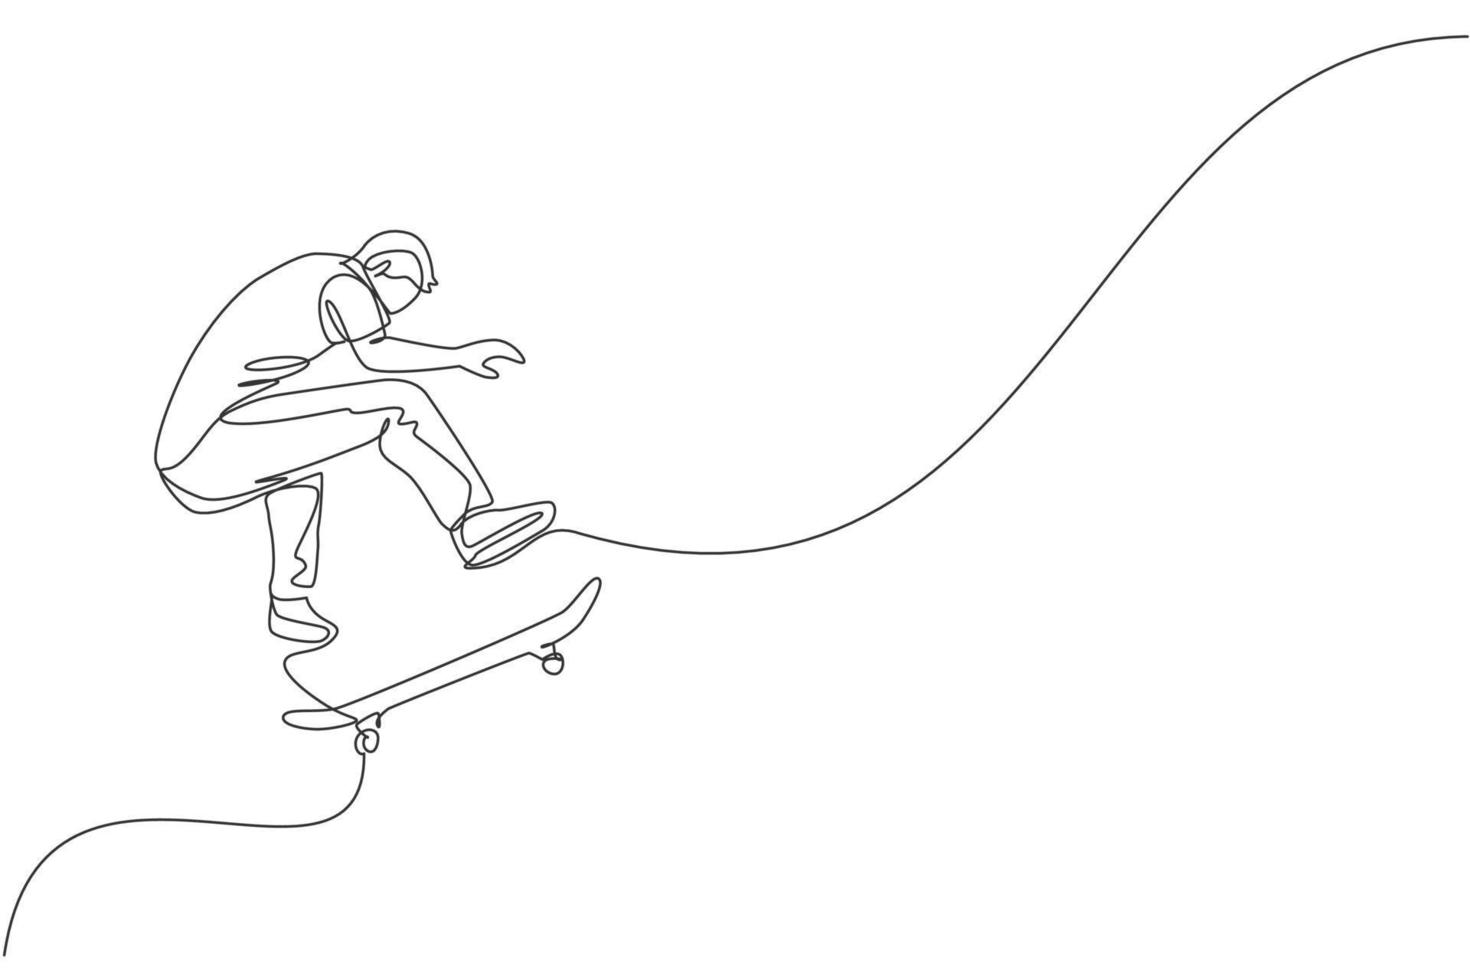 Single continuous line drawing of young cool skateboarder man riding skate and performing jump trick in skate park. Practicing outdoor sport concept. Trendy one line draw design vector illustration